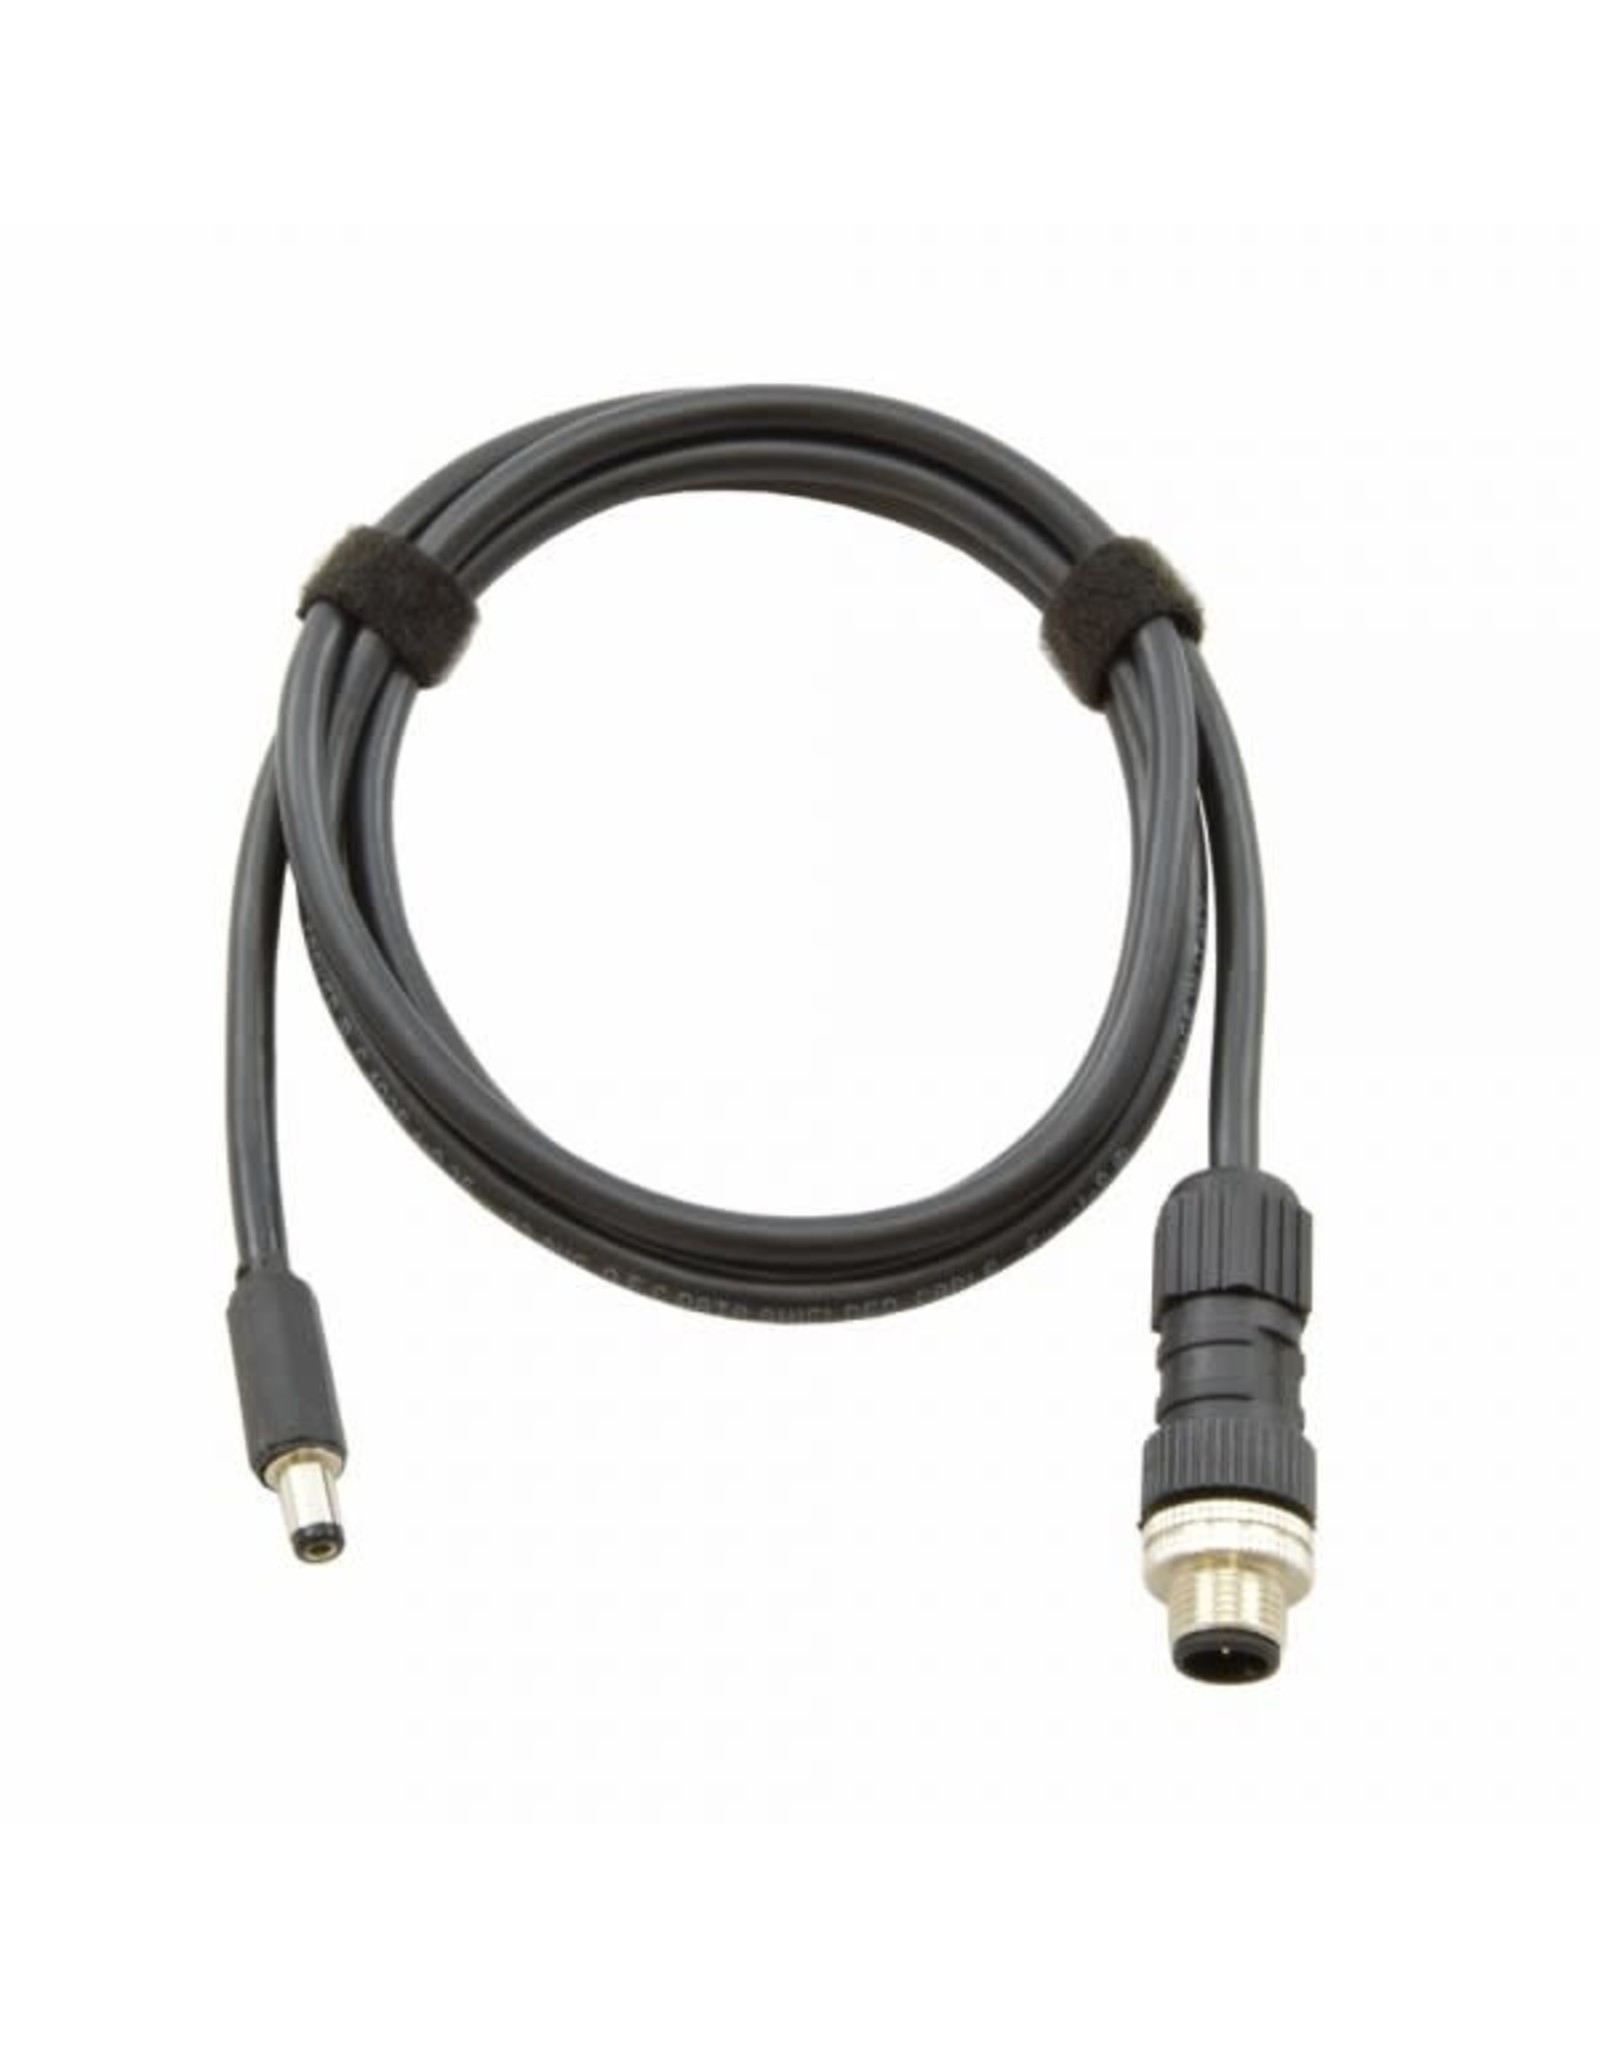 PrimaLuceLab Primaluce Eagle-compatible power cable with 5.5 - 2.5 connector - 115cm for 3A port